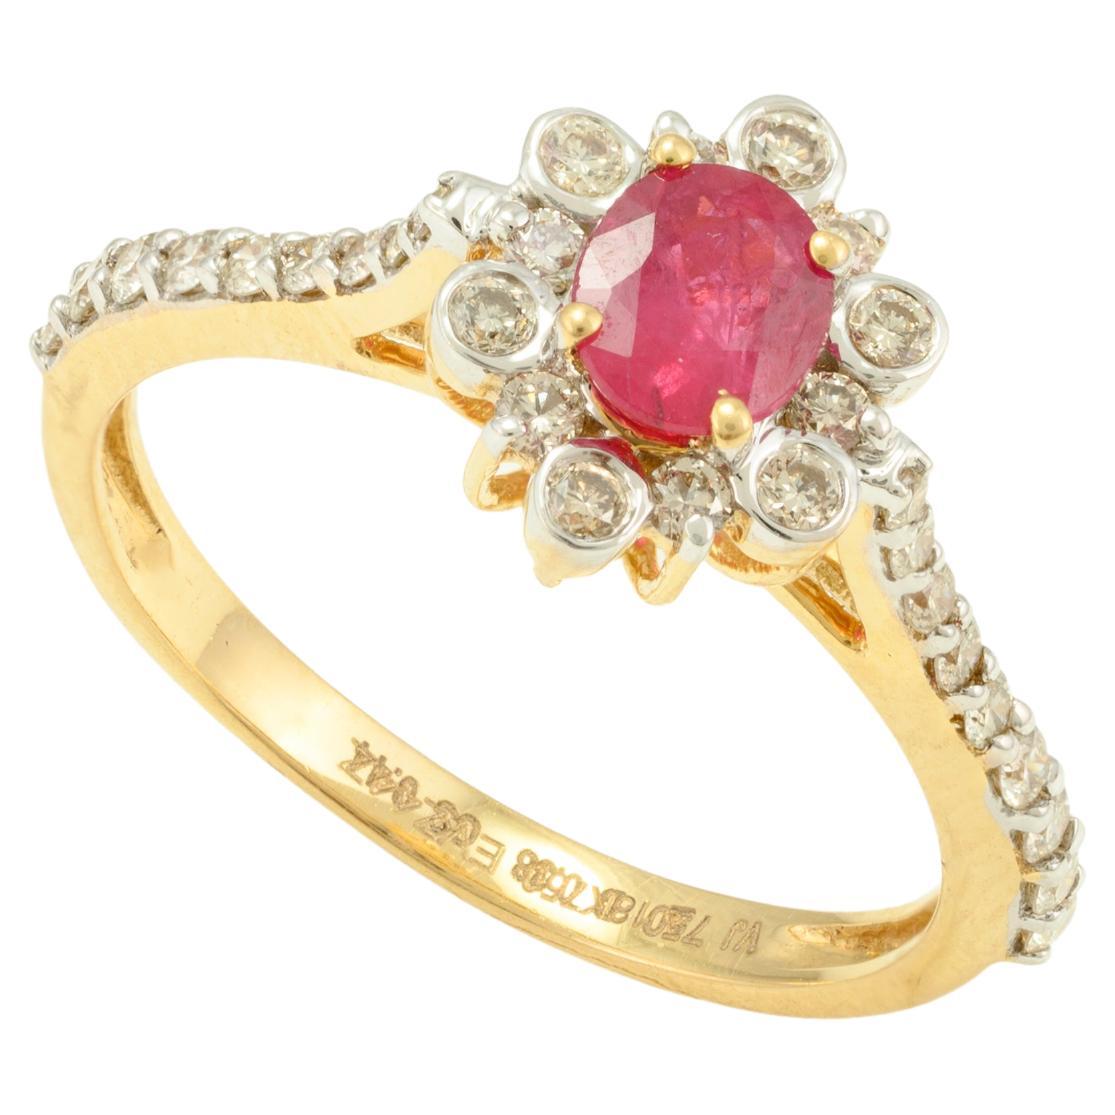 Contemporary Diamond and Natural Ruby Gemstone Ring in 18k Solid Yellow Gold